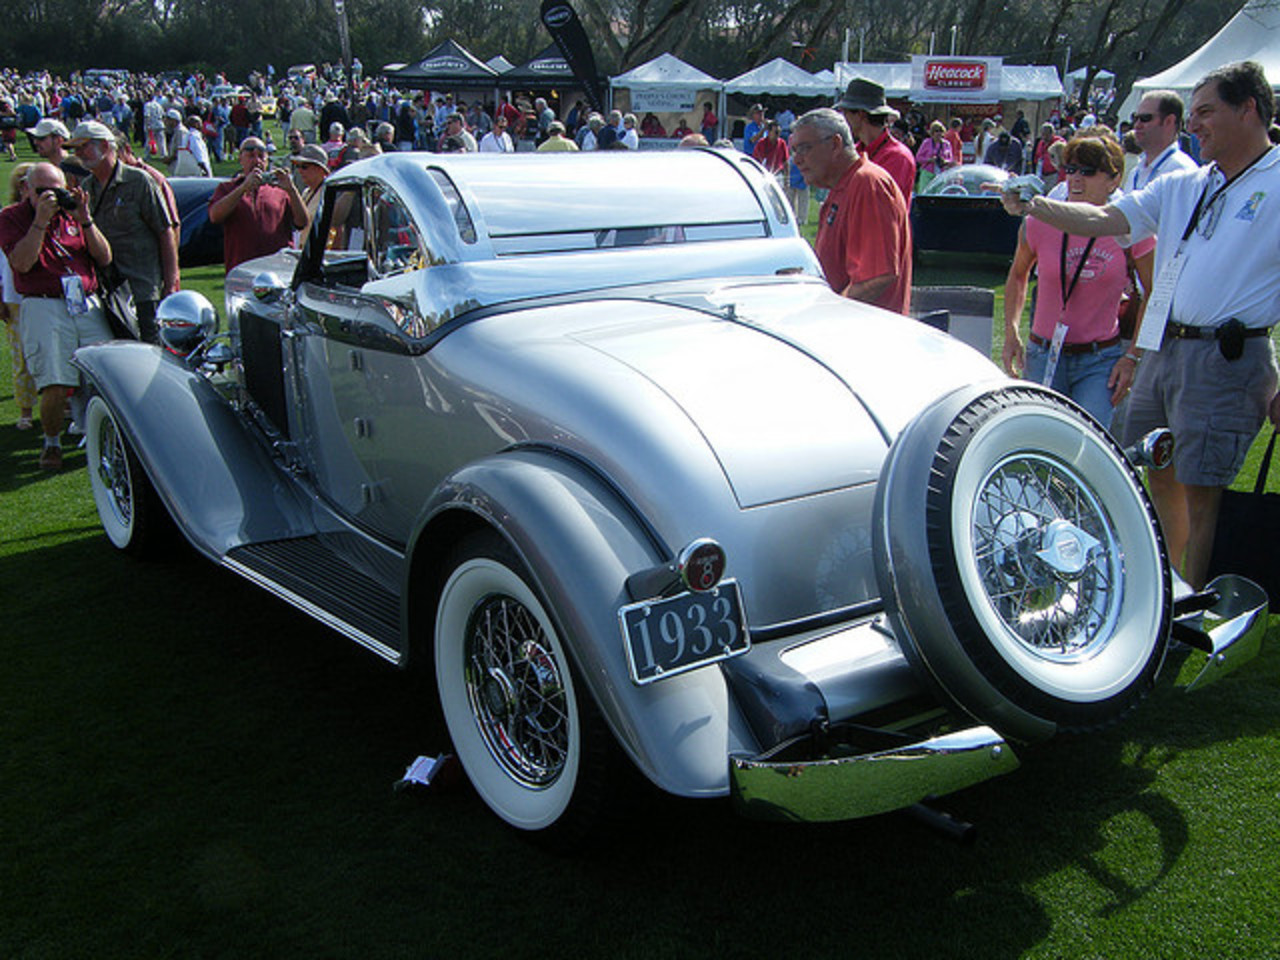 Auburn 8-100 Cabriolet Photo Gallery: Photo #03 out of 11, Image ...